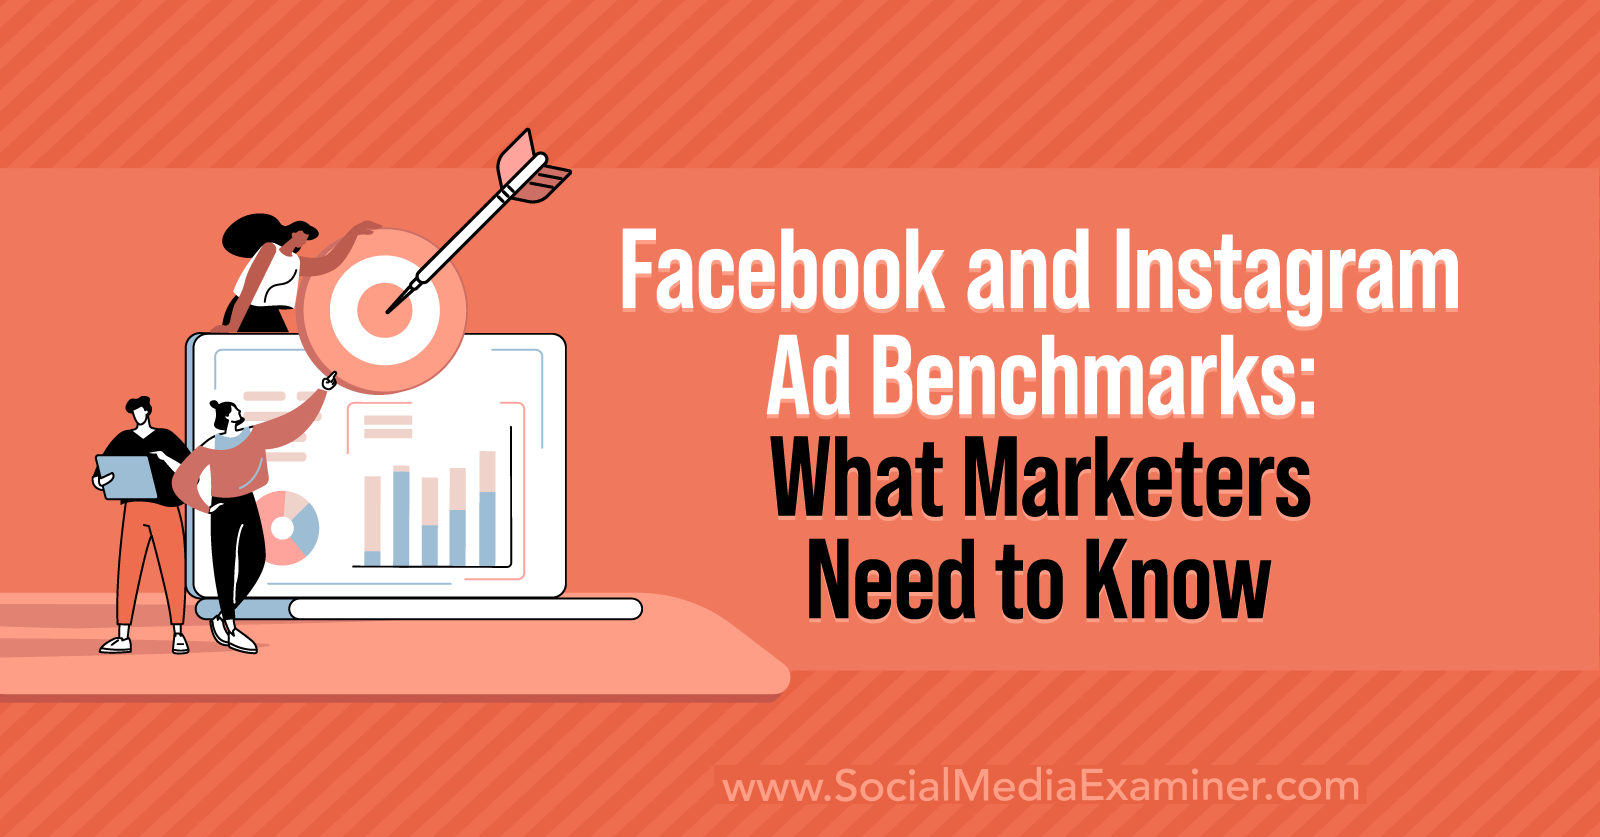 Facebook and Instagram Ad Benchmarks: What Marketers Need to Know